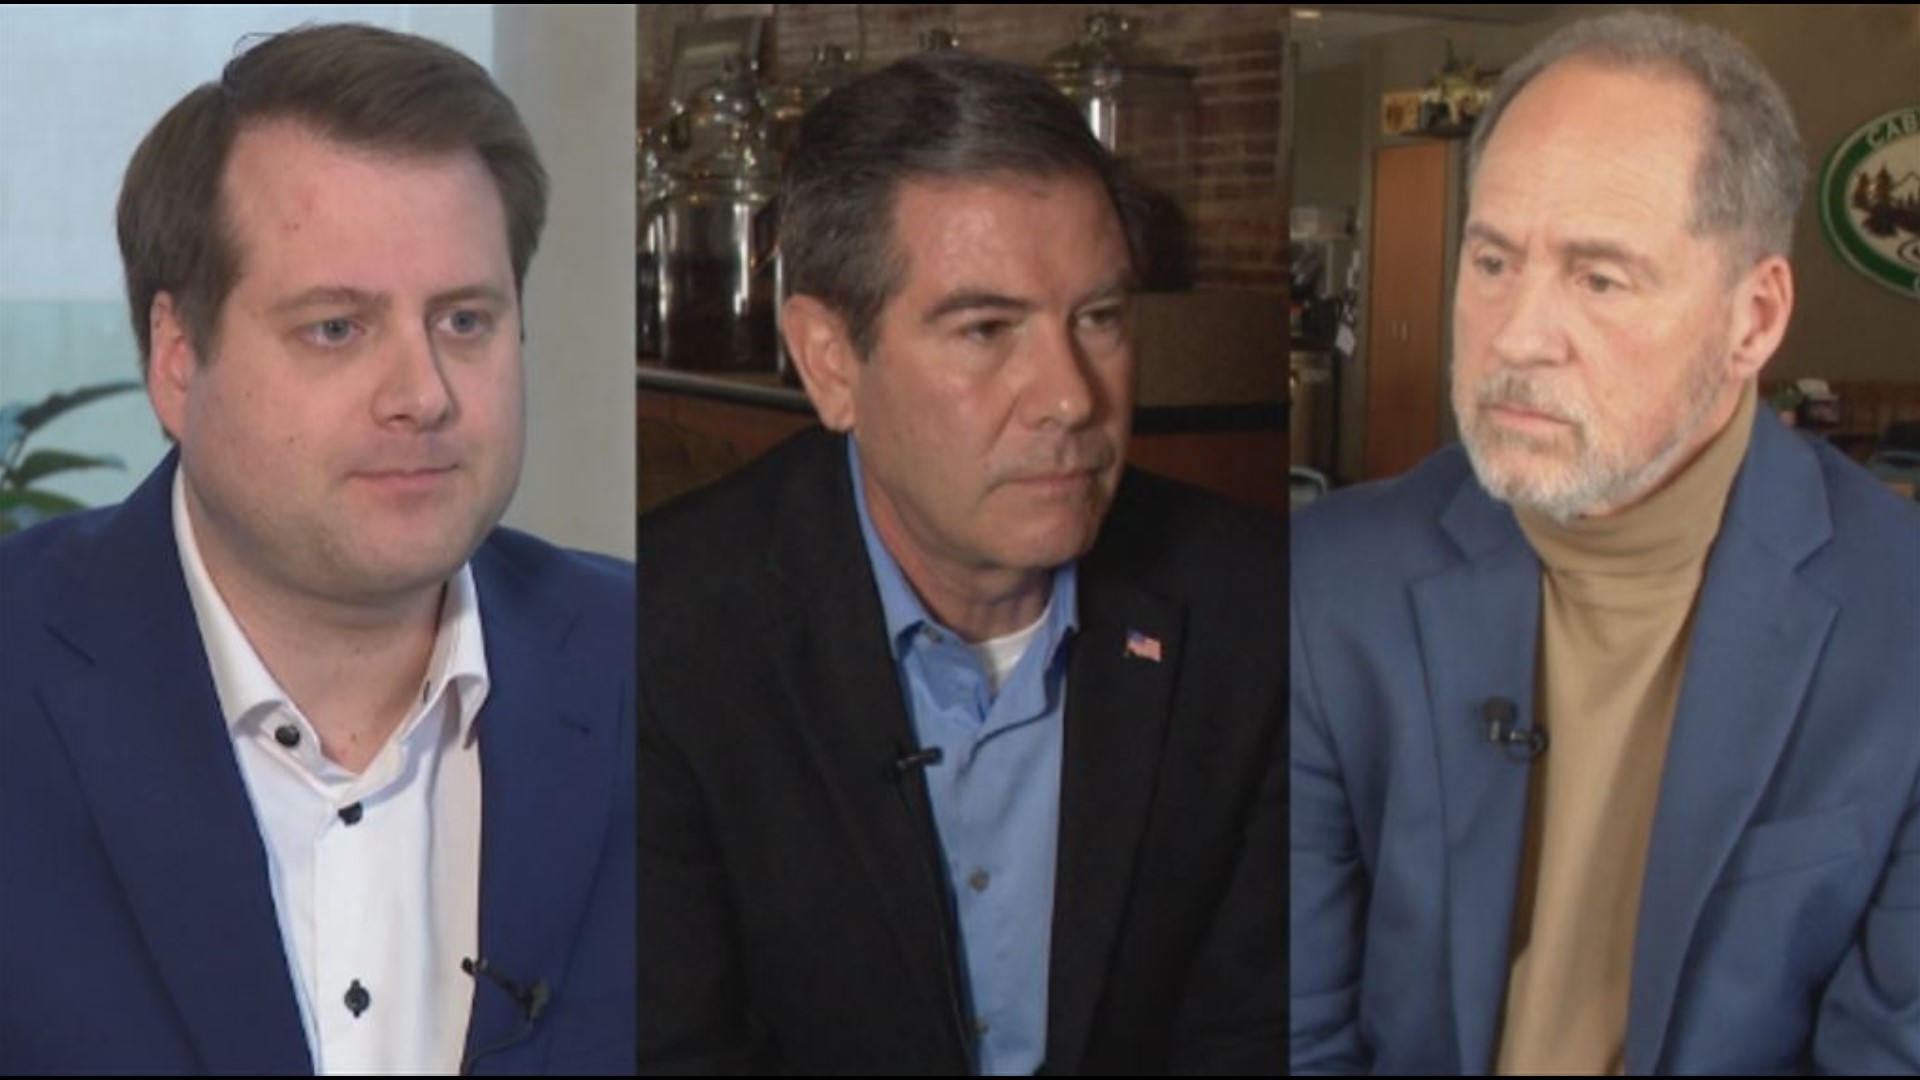 The three candidates, Derek Merrin, Craig Riedel and Steve Lankenau, all brought up the concerns they have with the national debt, but each has a different approach.